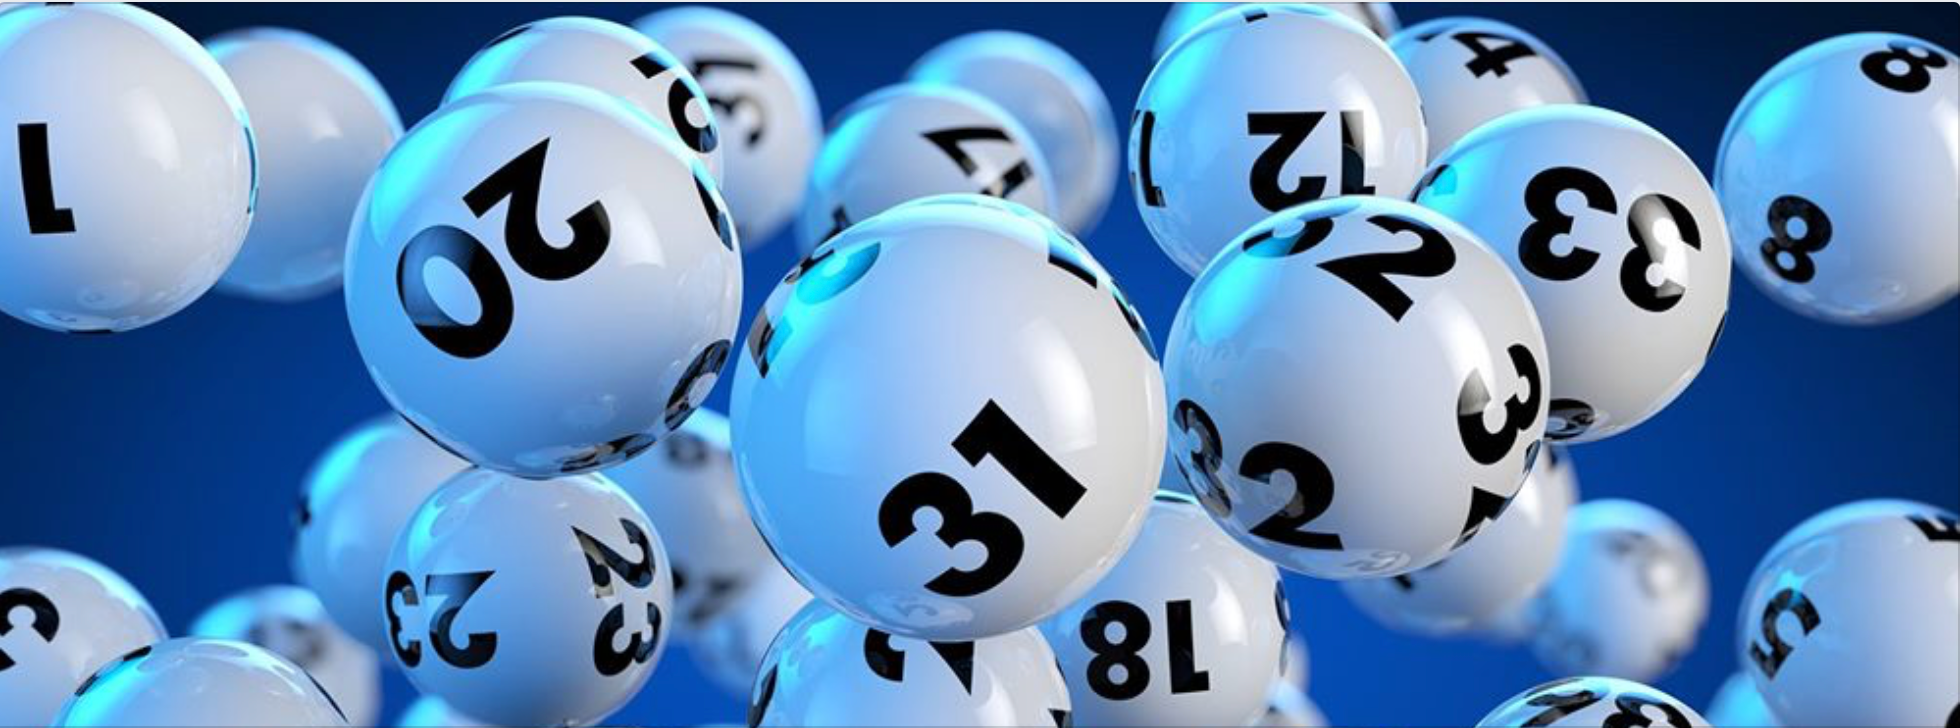 Fake Lotteries in Hanson’s Sights